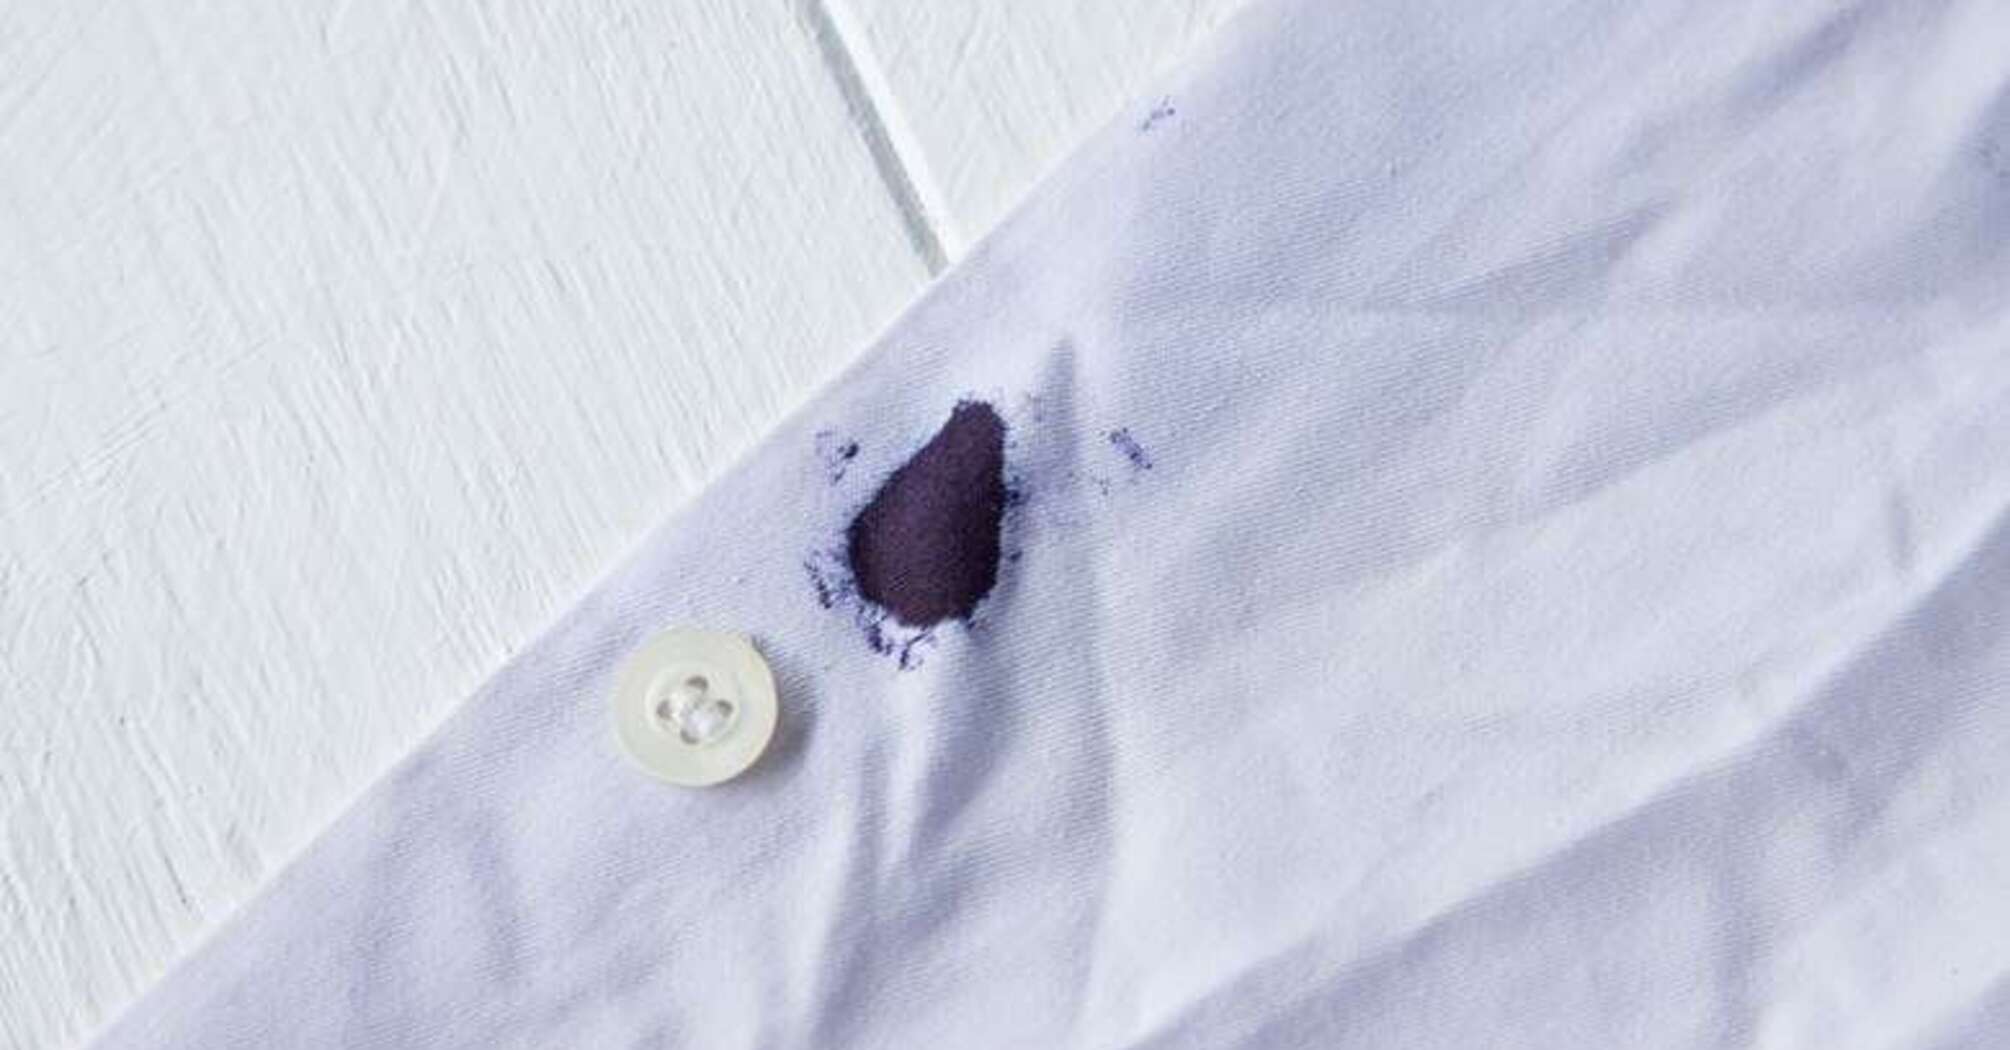 How to get rid of ballpoint pen stains